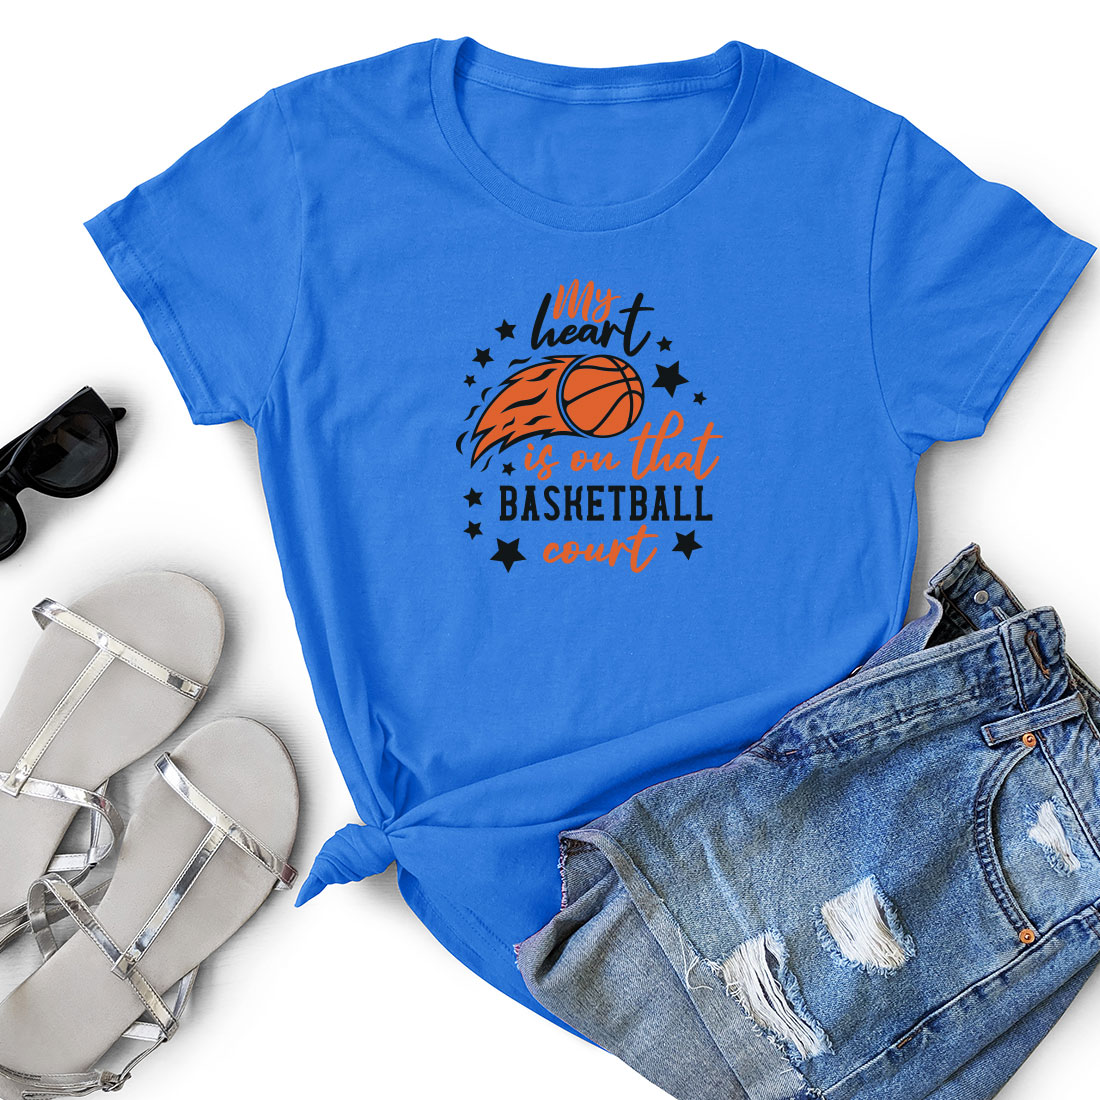 T - shirt with a basketball design on it.